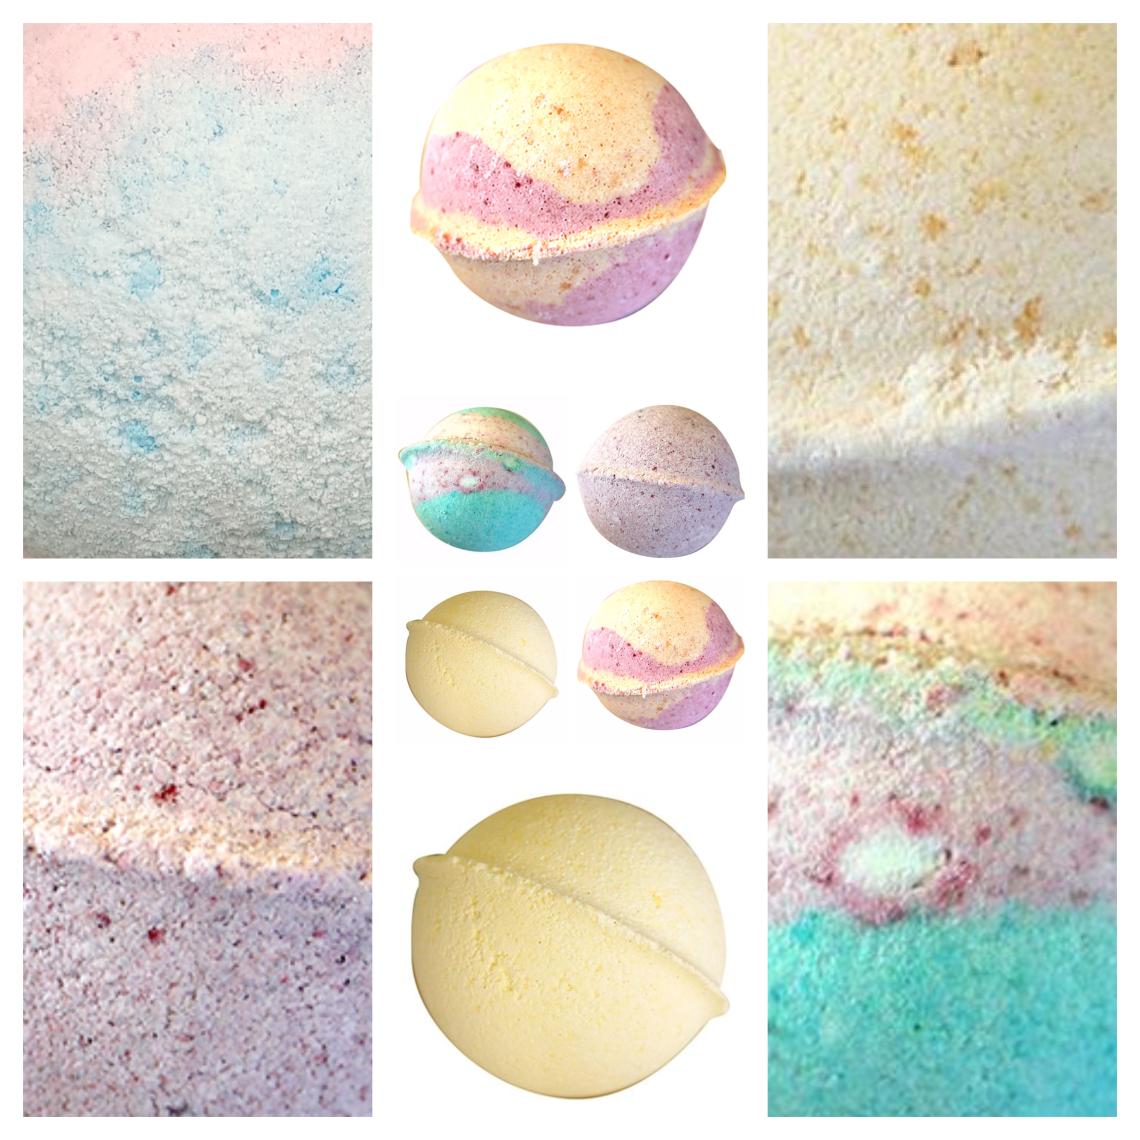 Collage of 10 bath bombs